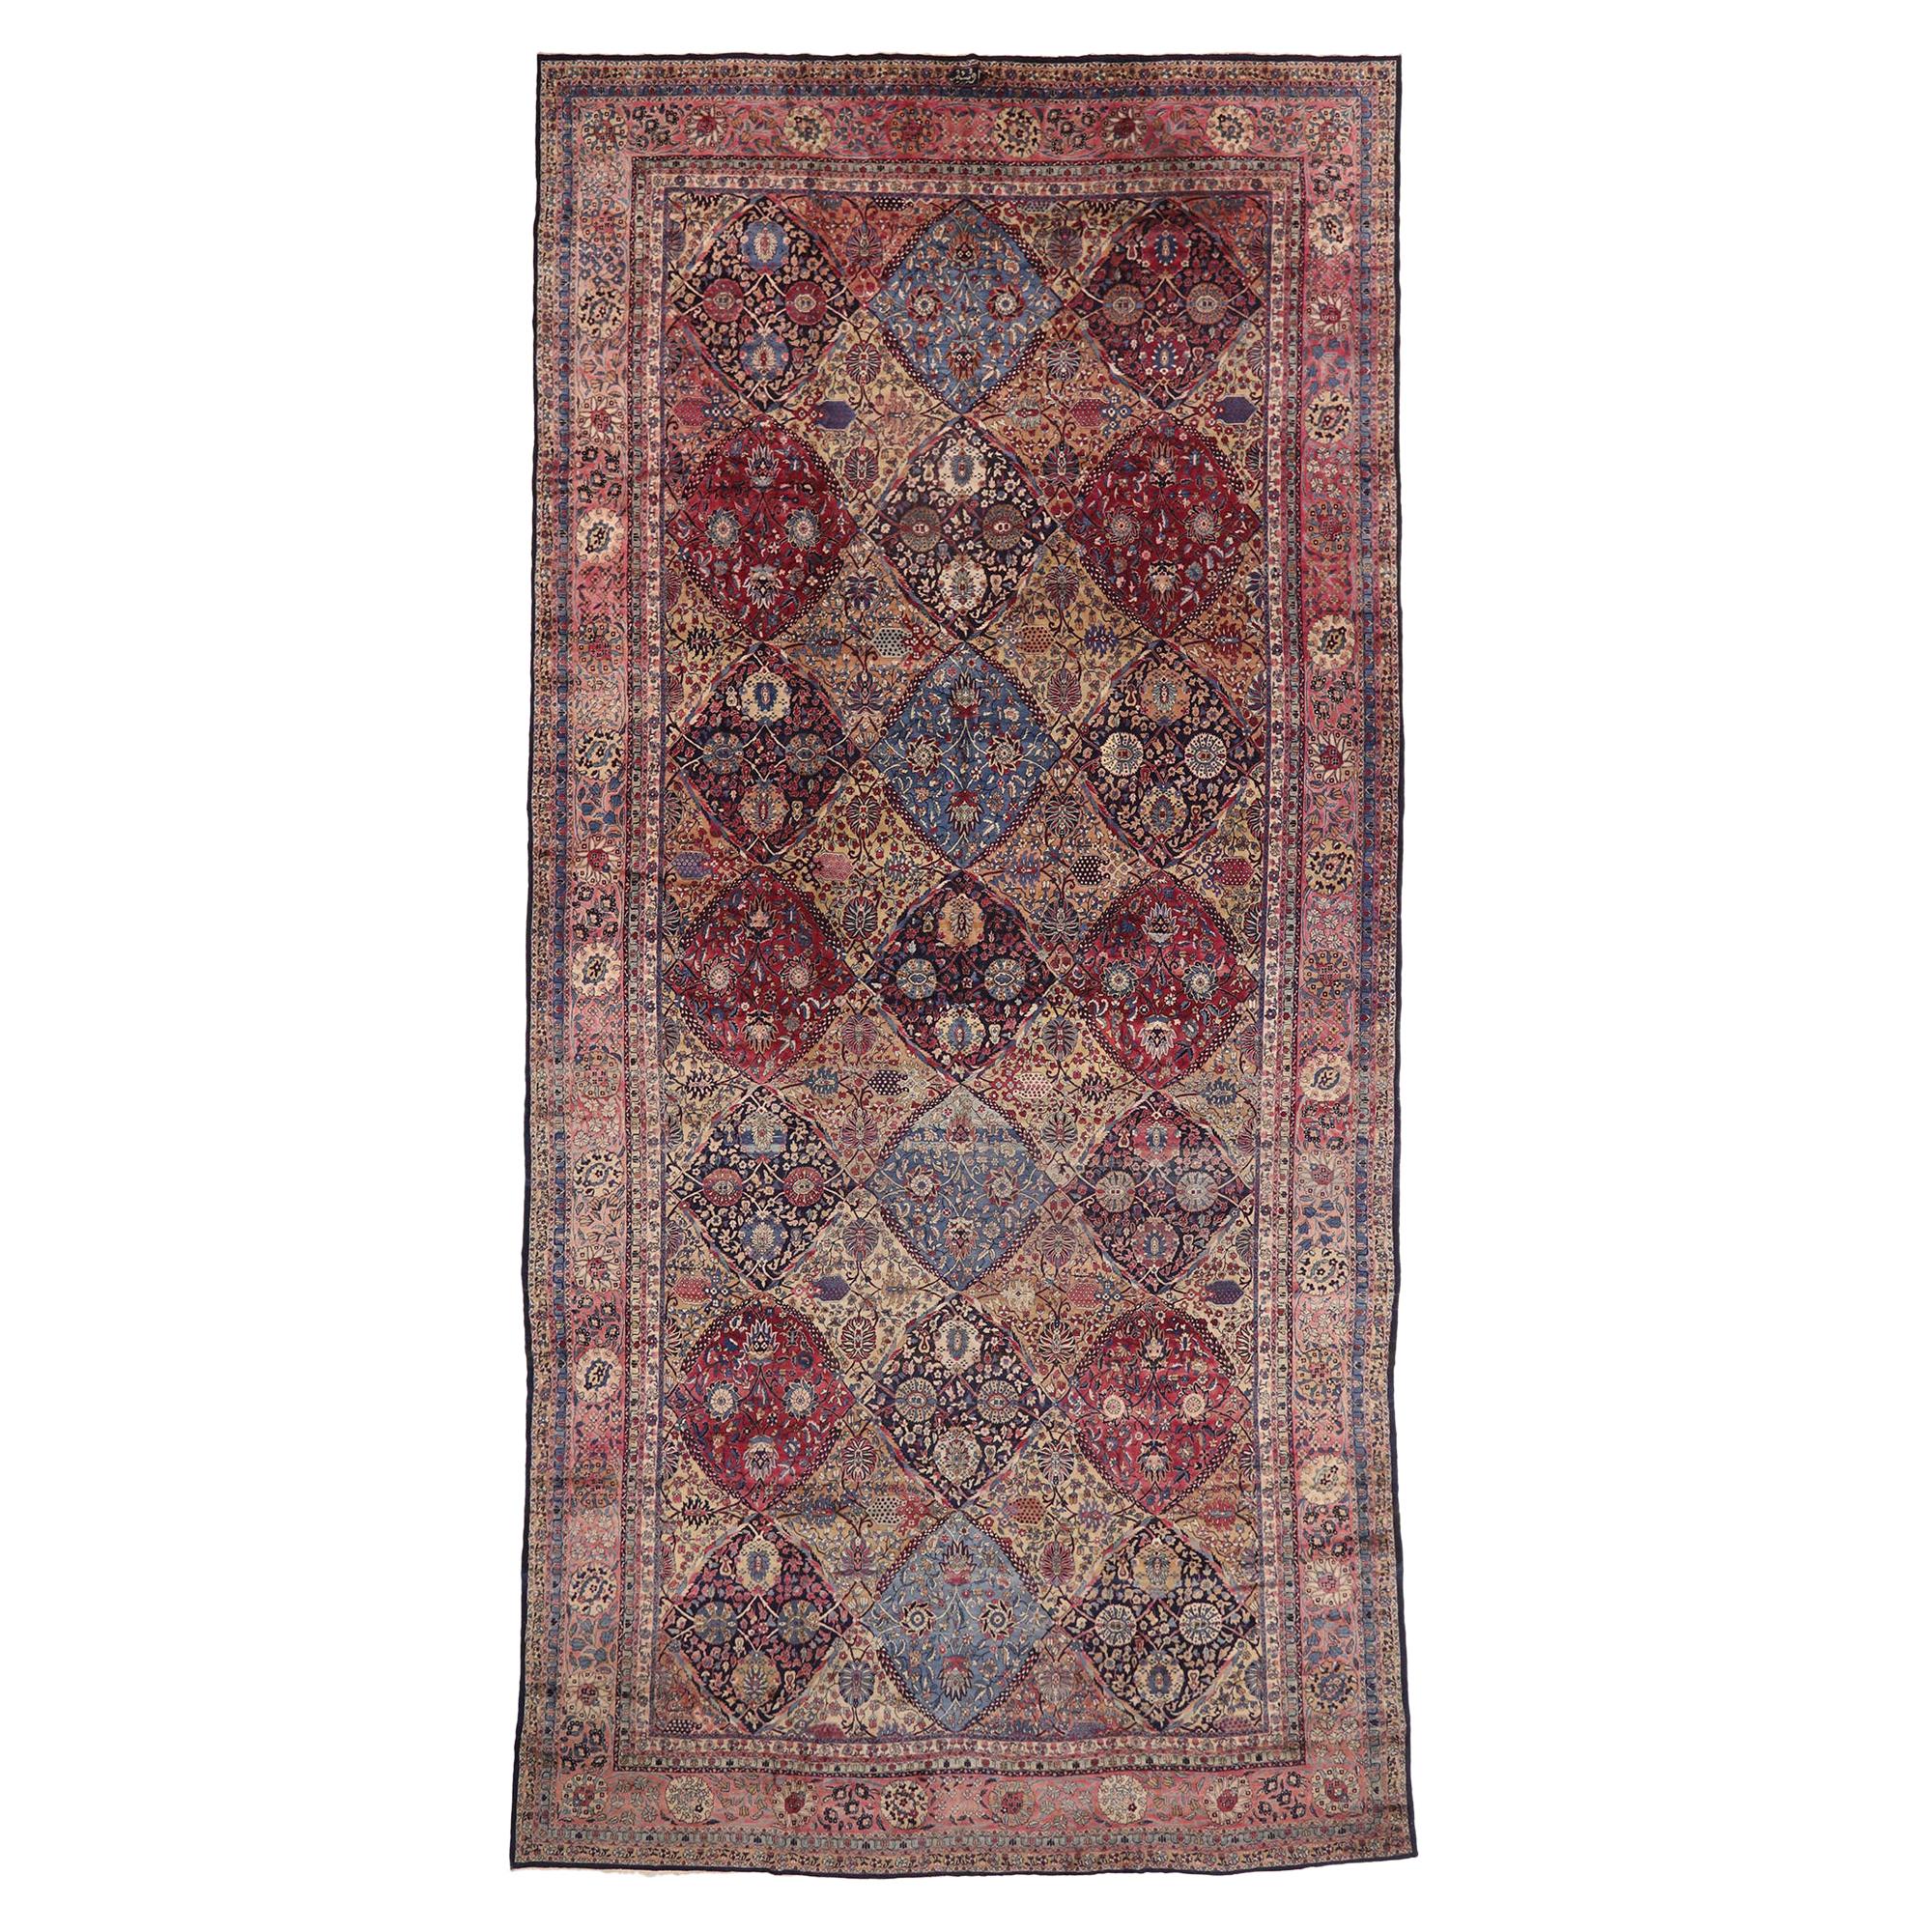 Oversized Antique Persian Kerman Rug, Hotel Lobby Size Carpet For Sale